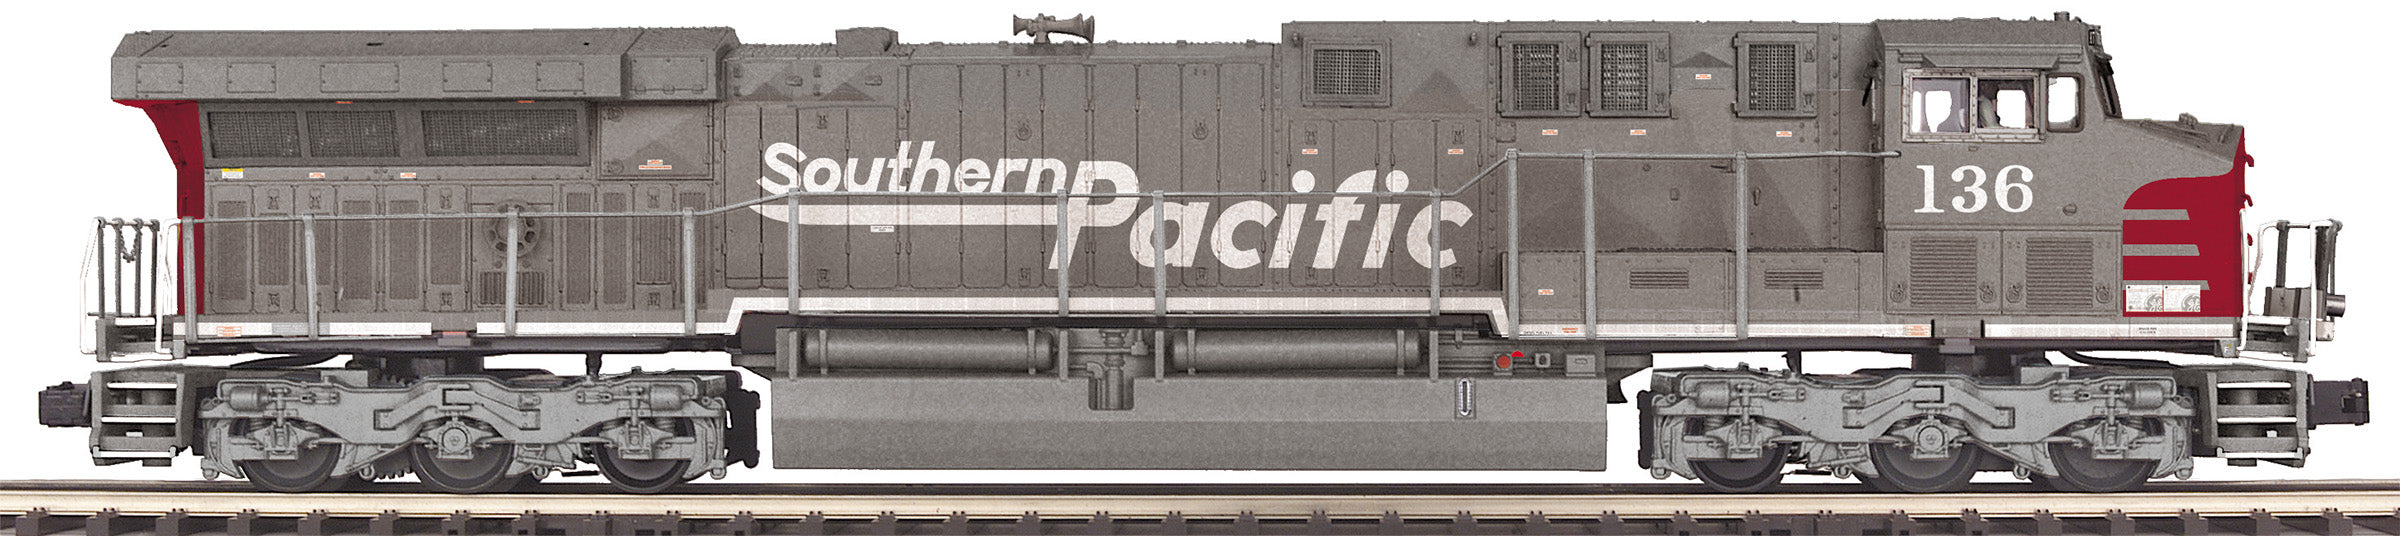 MTH 20-21904-1 - AC6000 Diesel Engine "Southern Pacific" #136 w/ PS3 - Custom Run for MrMuffin'sTrains